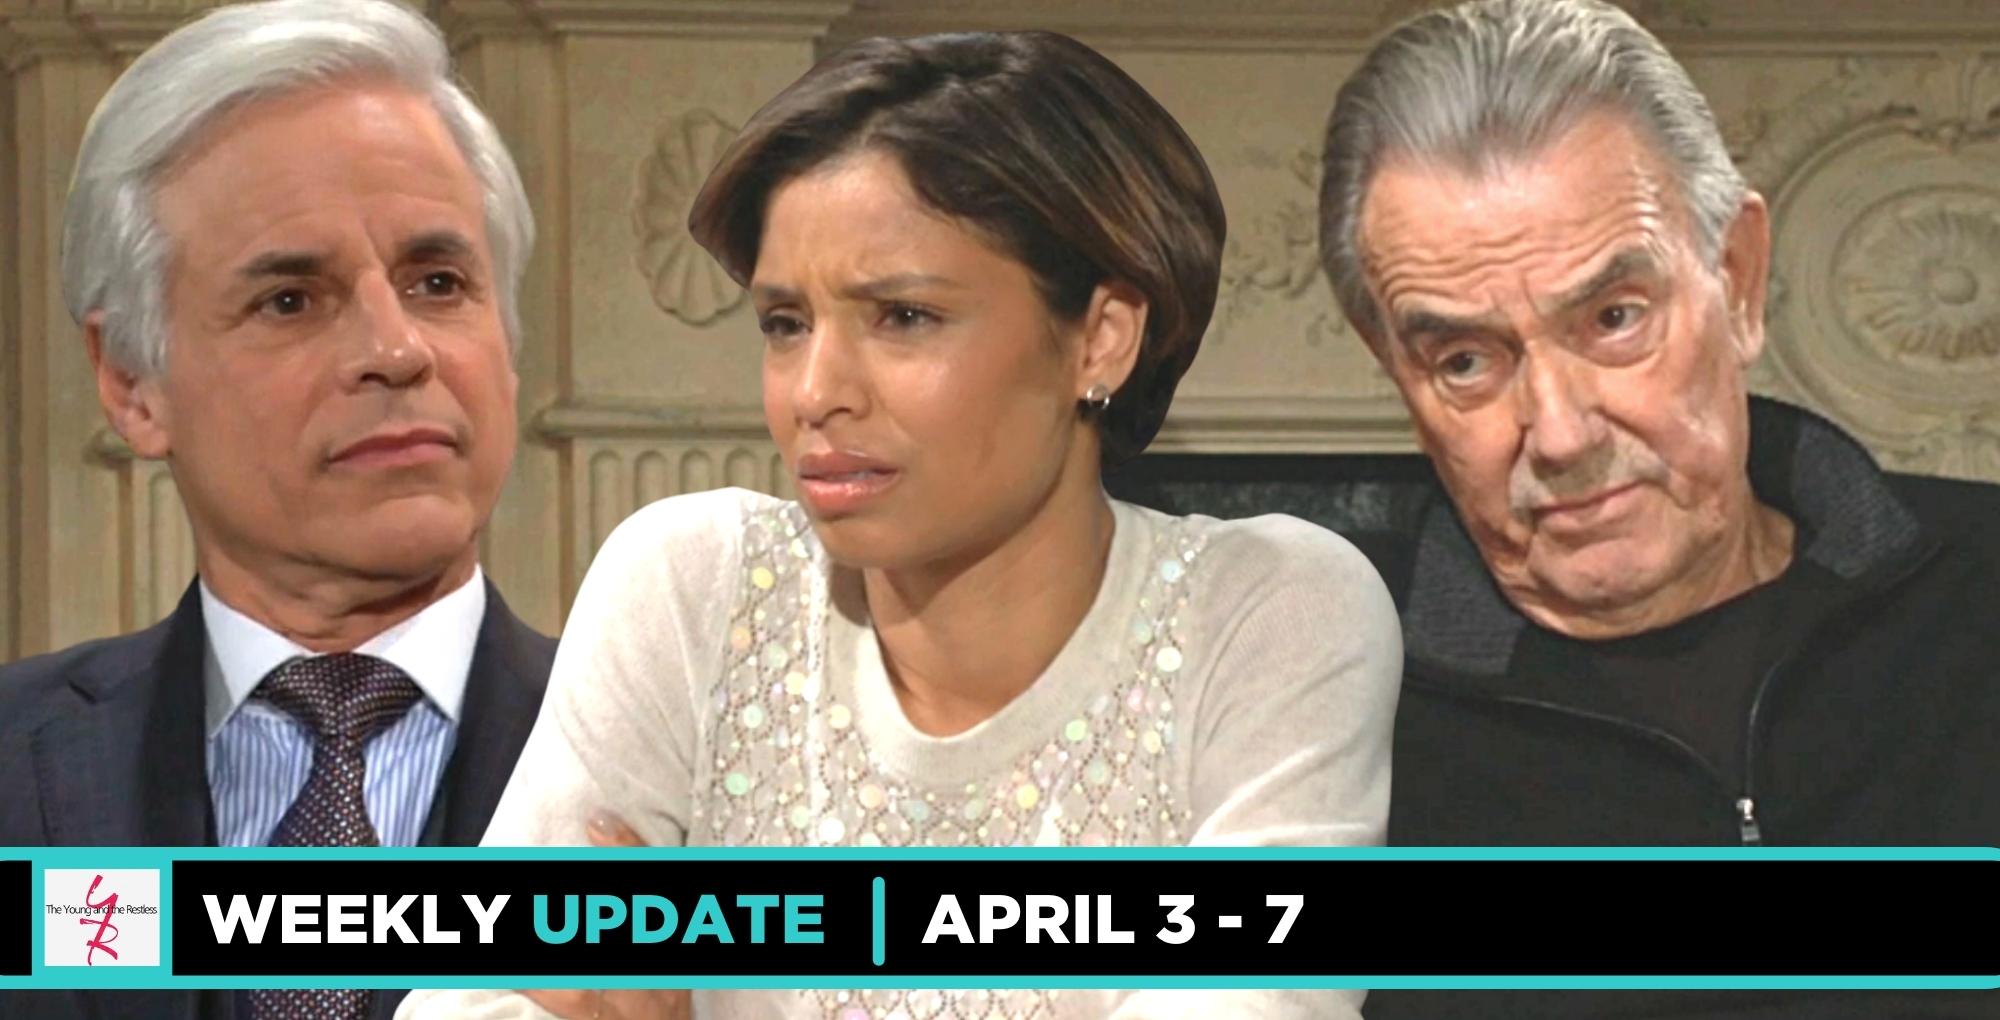 Y&R Spoilers Weekly Update: Plotting And A Disturbing Message